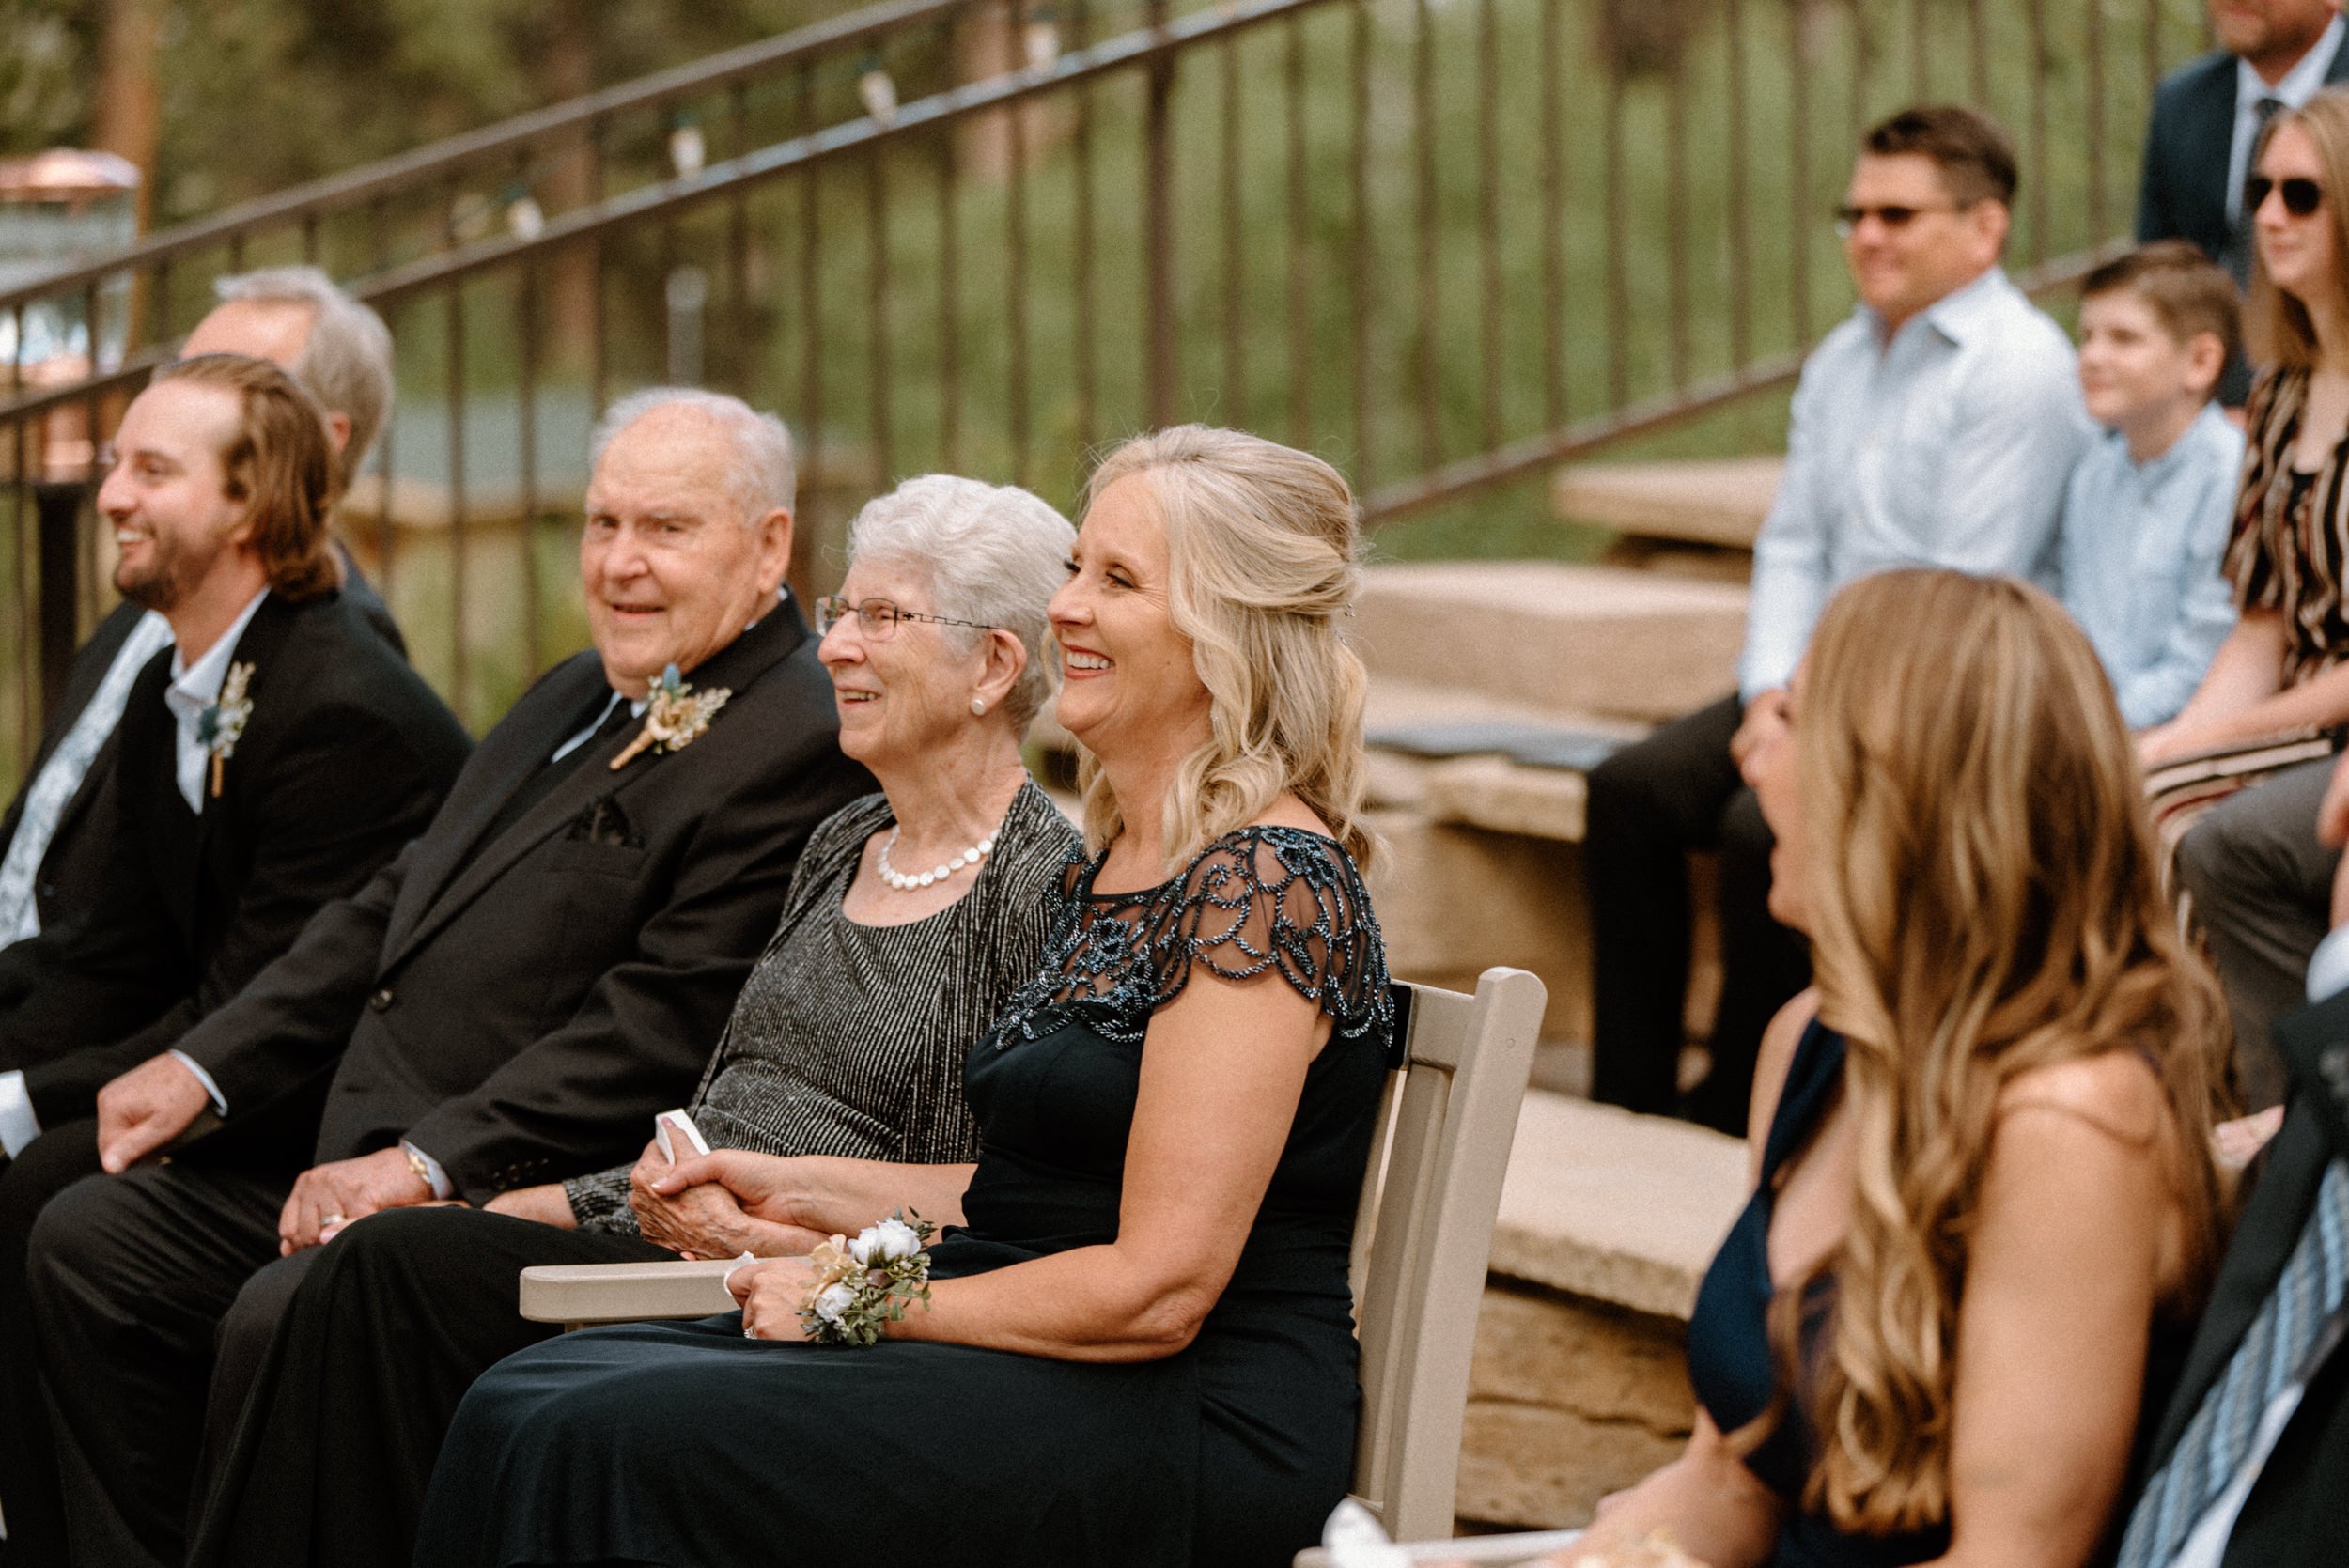 Wedding guests smile as the ceremony takes place